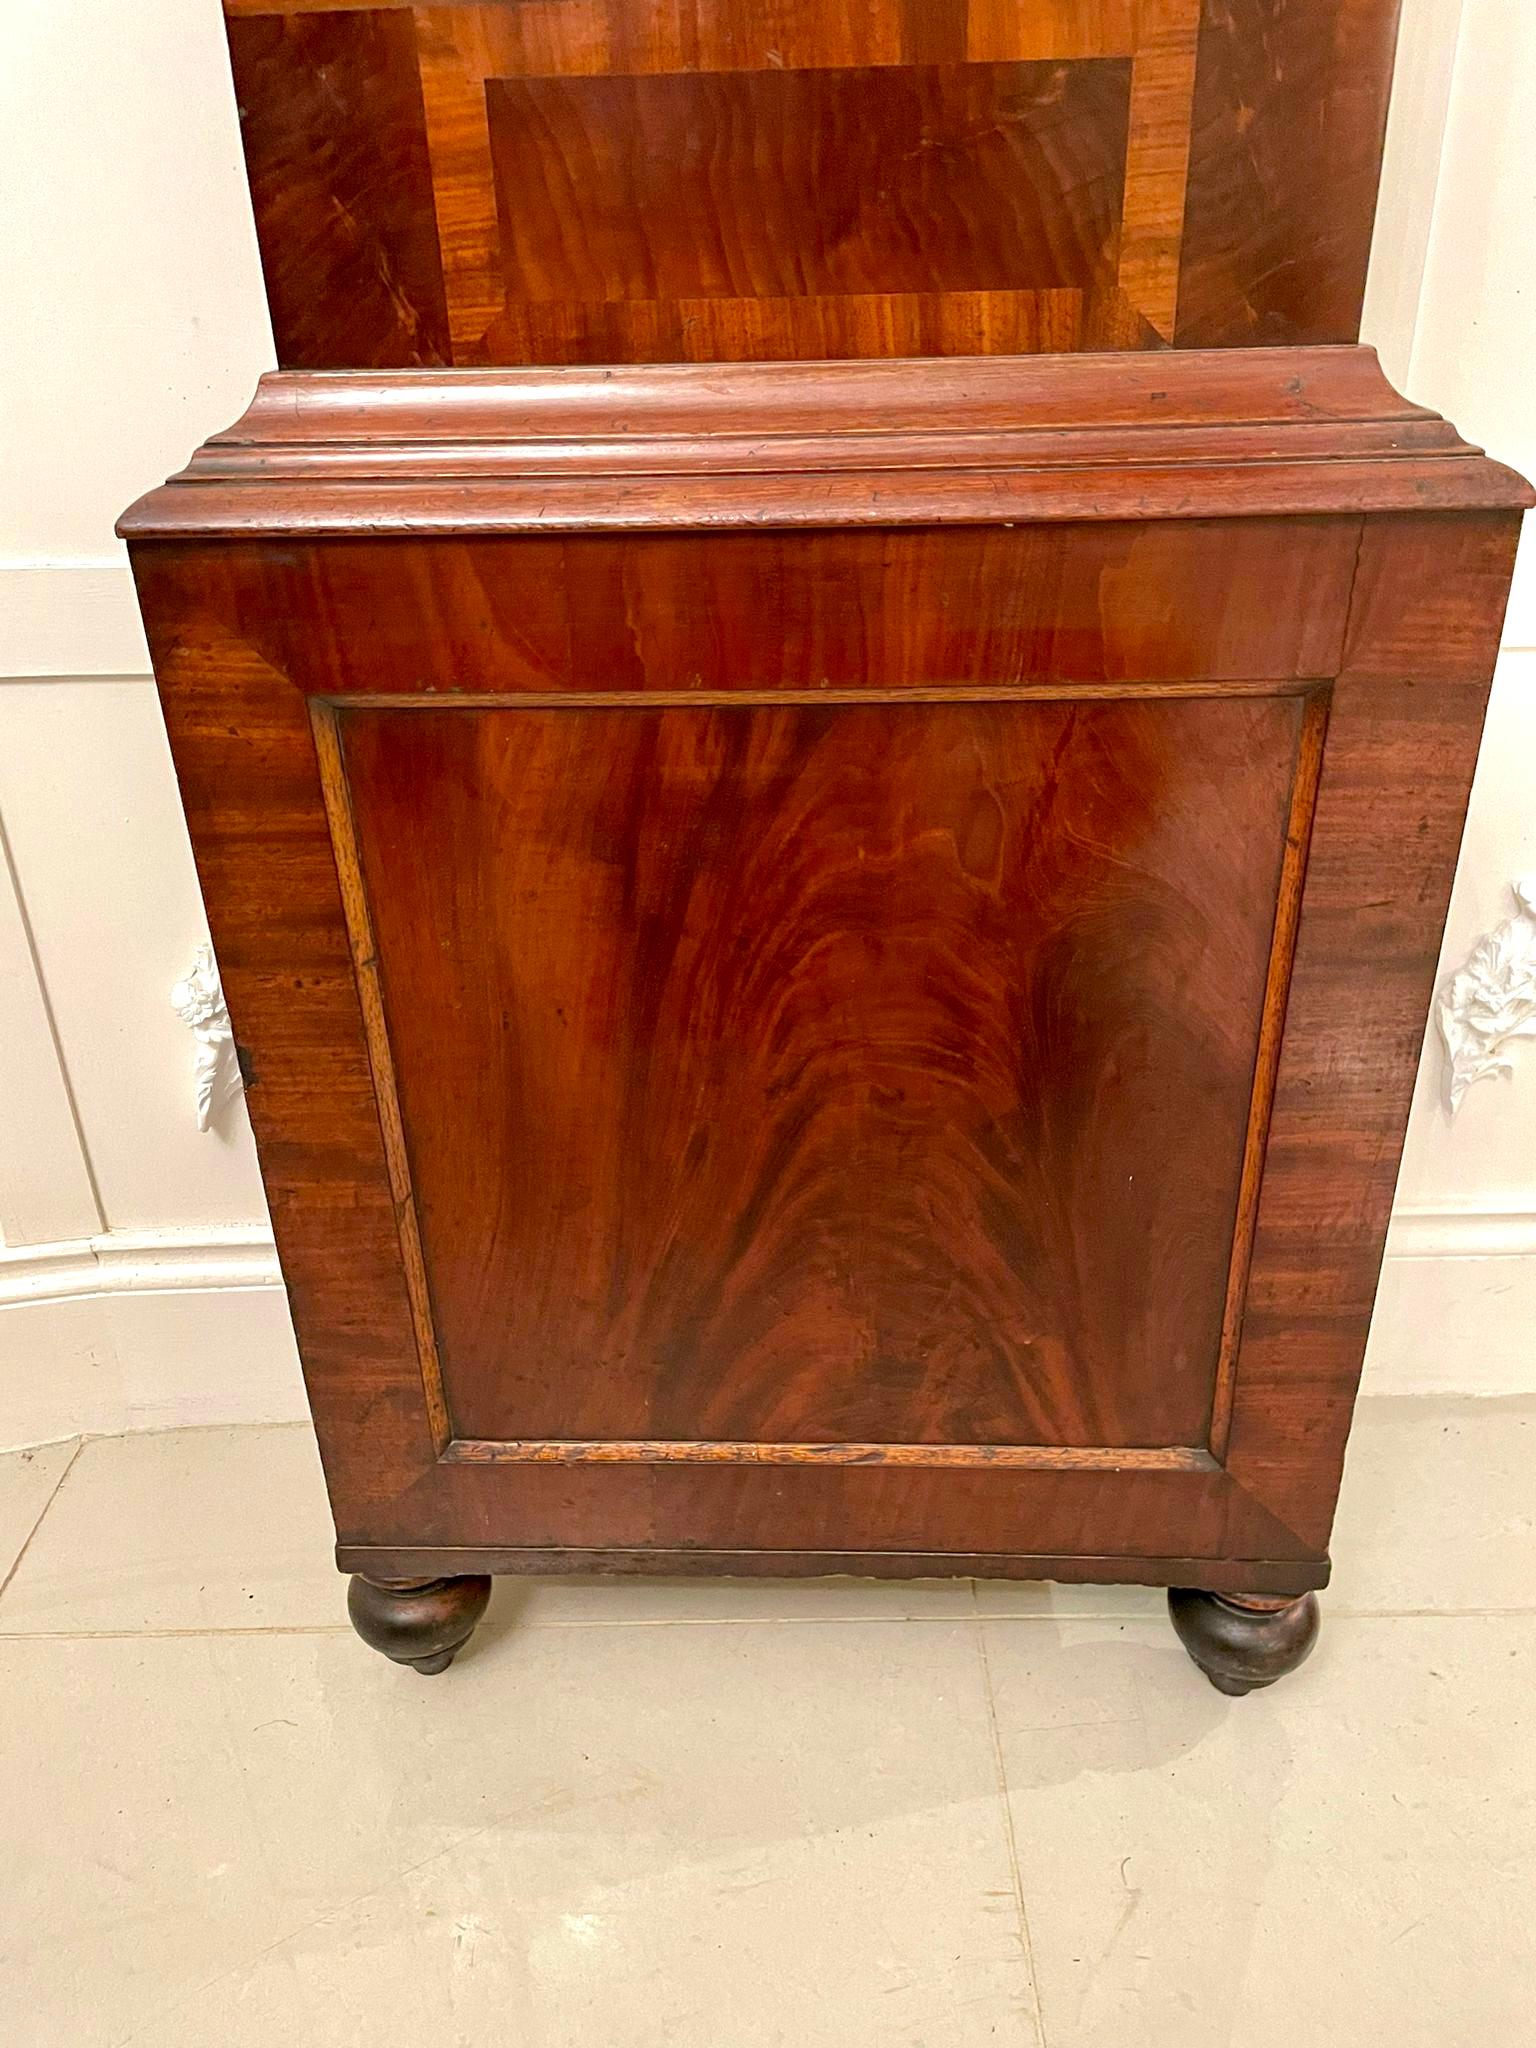 Antique George III quality mahogany eight day longcase clock having a fantastic quality mahogany case with an arched shaped door flanked by reeded turned columns, quality painted arched shaped dial with original hands, second and date dials, eight